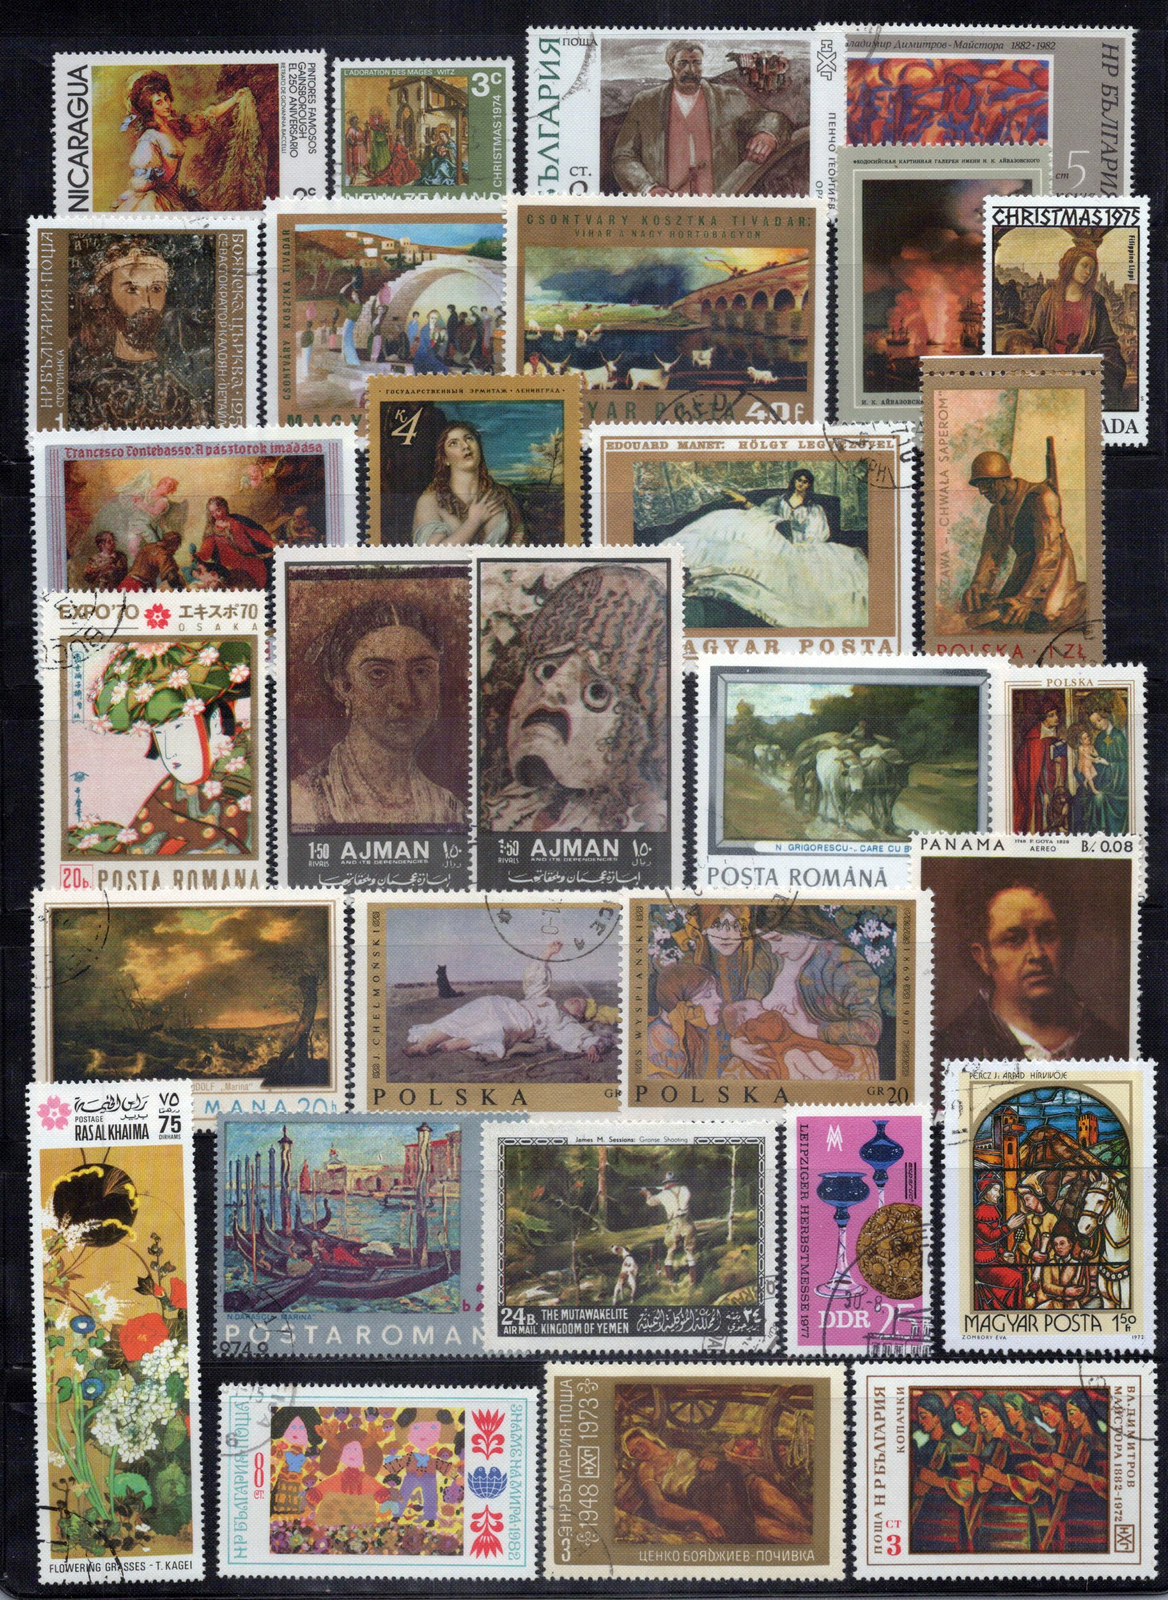 Primary image for Art Stamp Collection Used Paintings Flowers Landscapes Boats ZAYIX 0424S0297